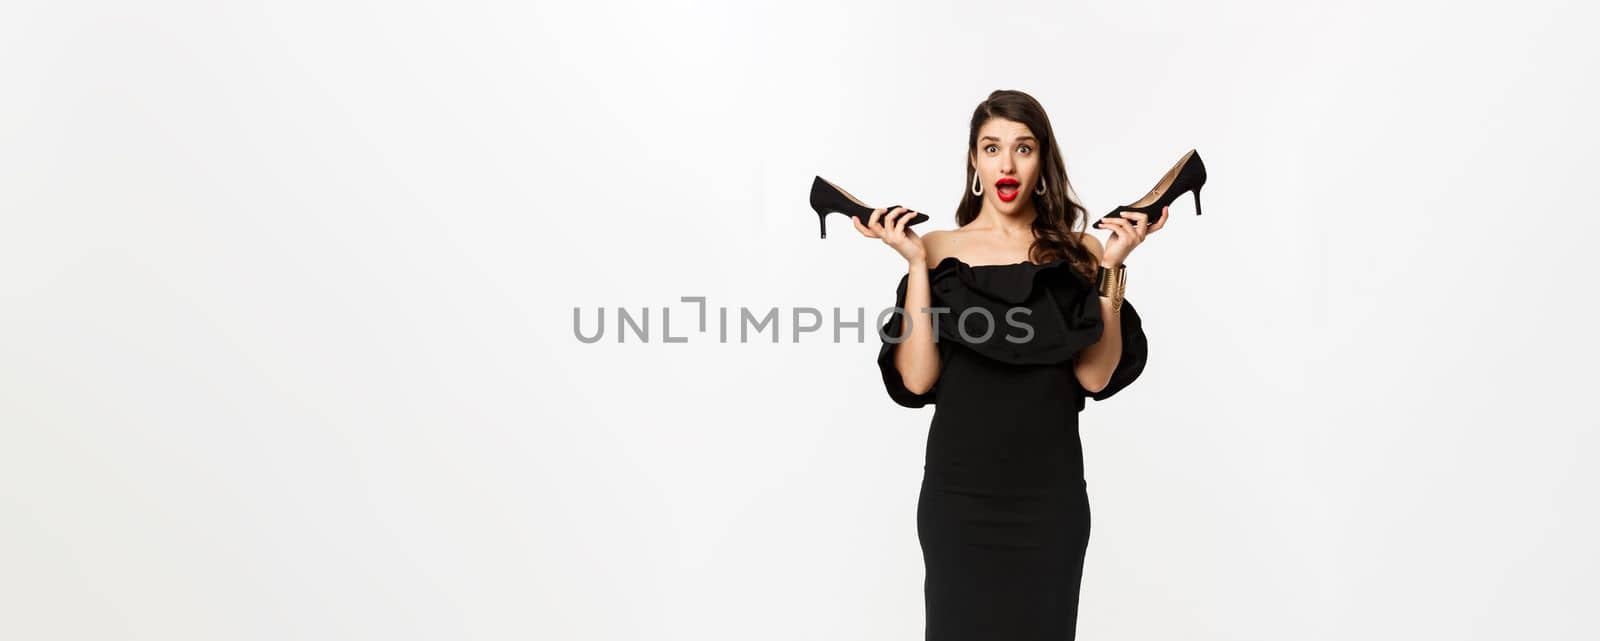 Beauty and fashion concept. Full length of excited glamour woman in black dress, showing high heels and looking excited, dressing up for party, white background.